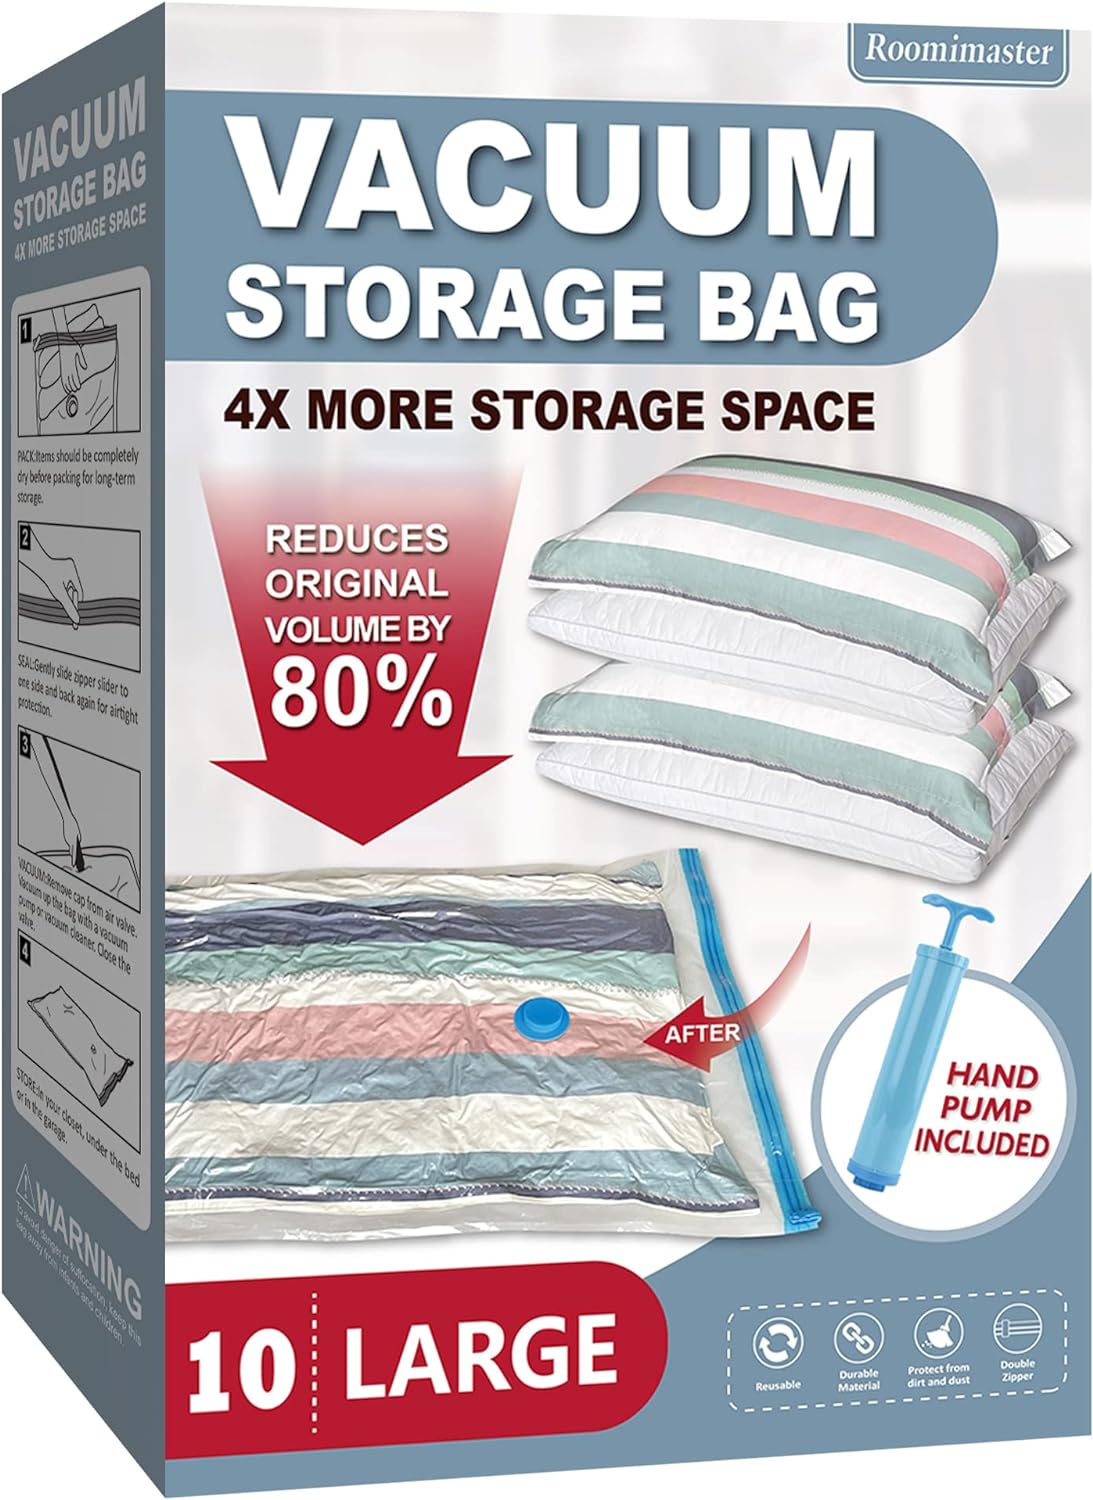 Vacuum Storage Bags, 10 Jumbo Space Saver Bags Vacuum Seal Bags with Pump, Space Bags, Vacuum Sealer Bags for Clothes, Comforters, Blankets, Bedding-A